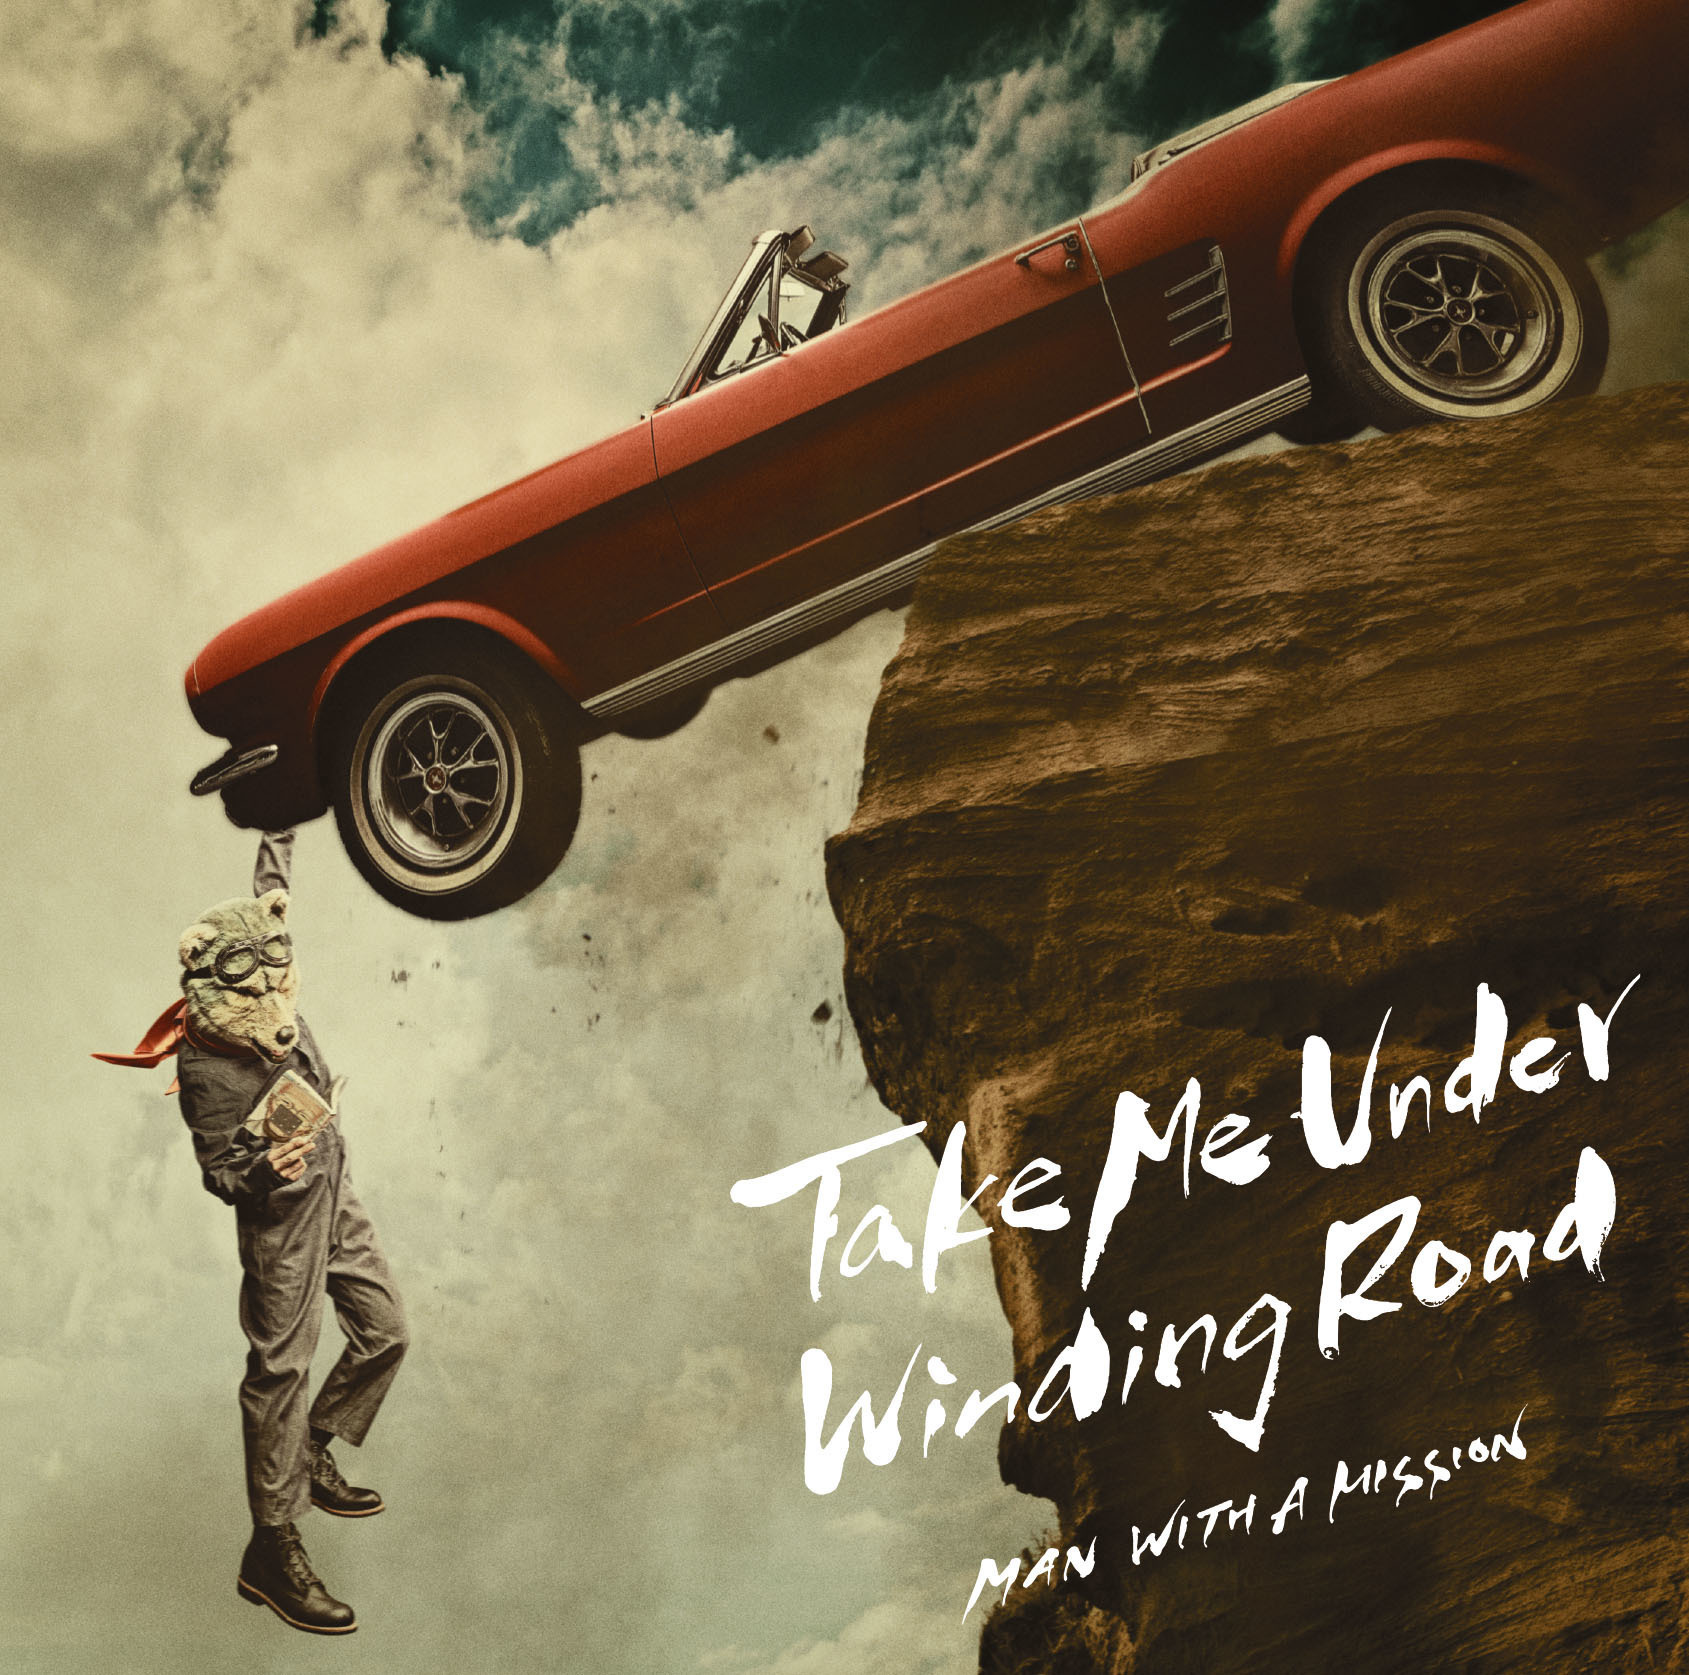 Take Me Under / Winding Road【初回生産限定盤】 | MAN WITH A MISSION